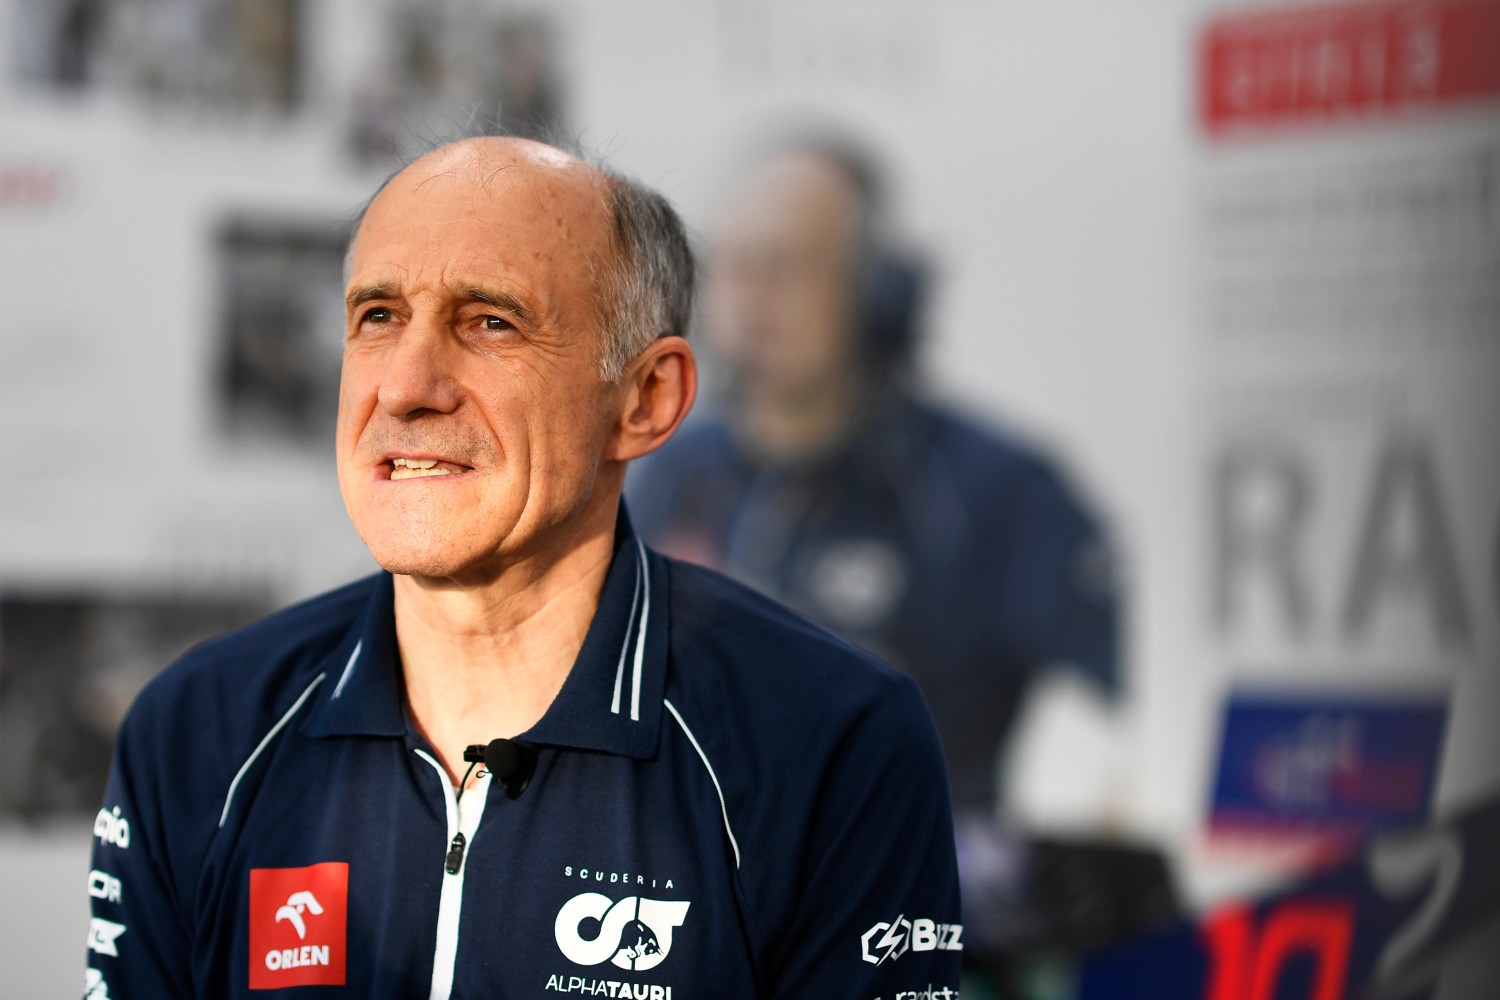 Scuderia AlphaTauri Team Principal Franz Tost talks to the media in the Paddock during previews ahead of the F1 Grand Prix of Japan at Suzuka International Racing Course on September 21, 2023 in Suzuka, Japan. (Photo by Rudy Carezzevoli/Getty Images) // Getty Images / Red Bull Content Pool